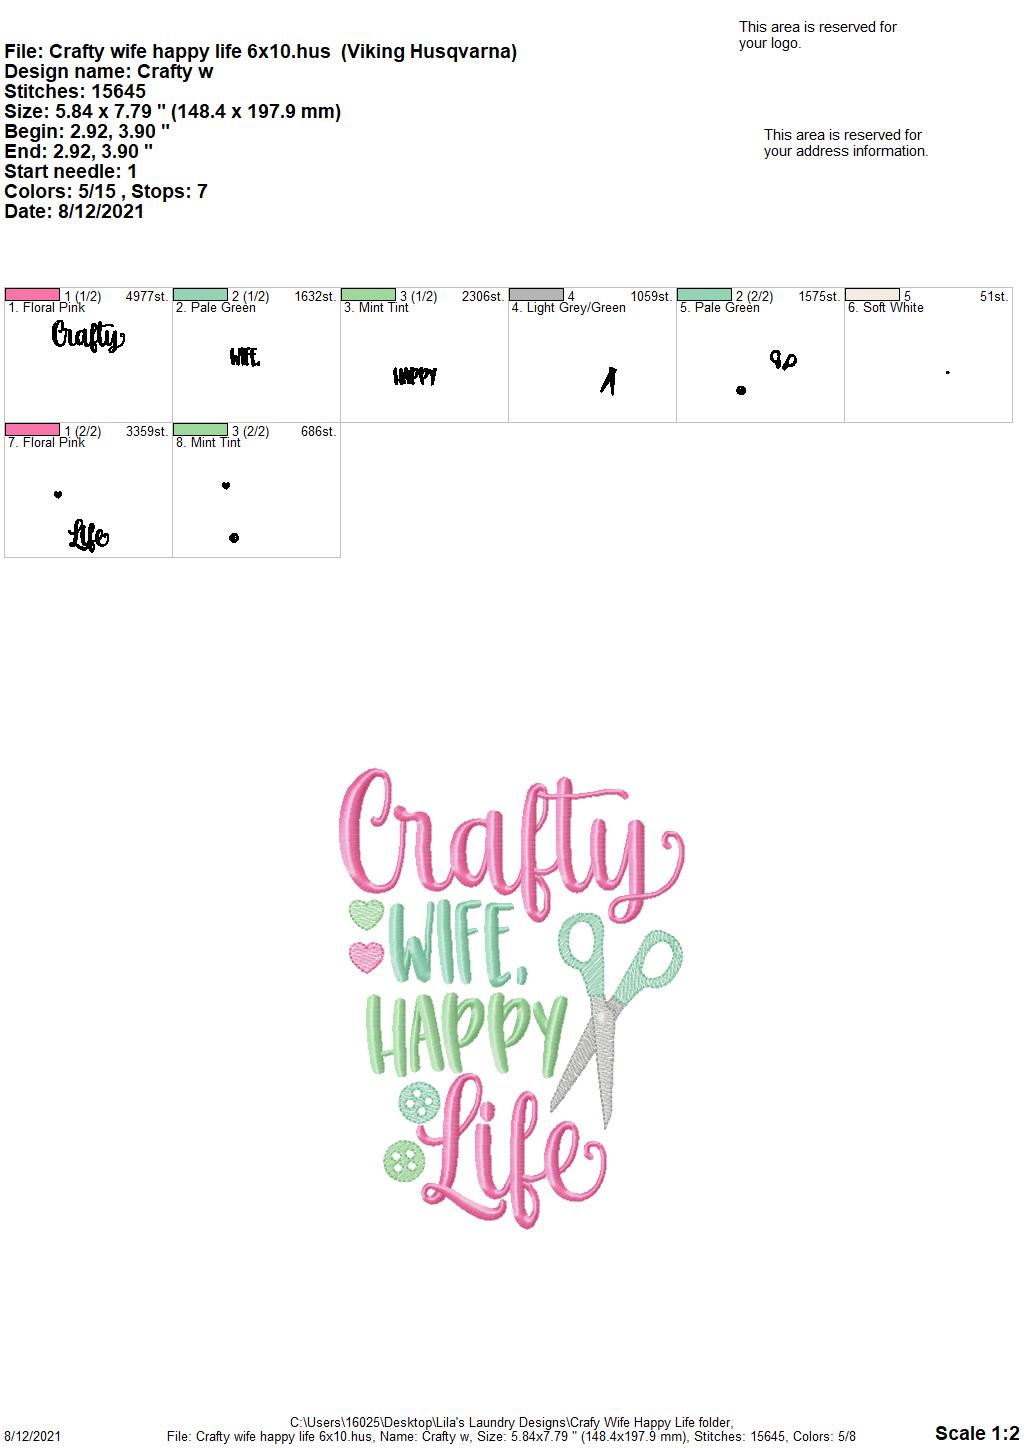 Crafty Wife, Happy Life - 3 sizes- Digital Embroidery Design